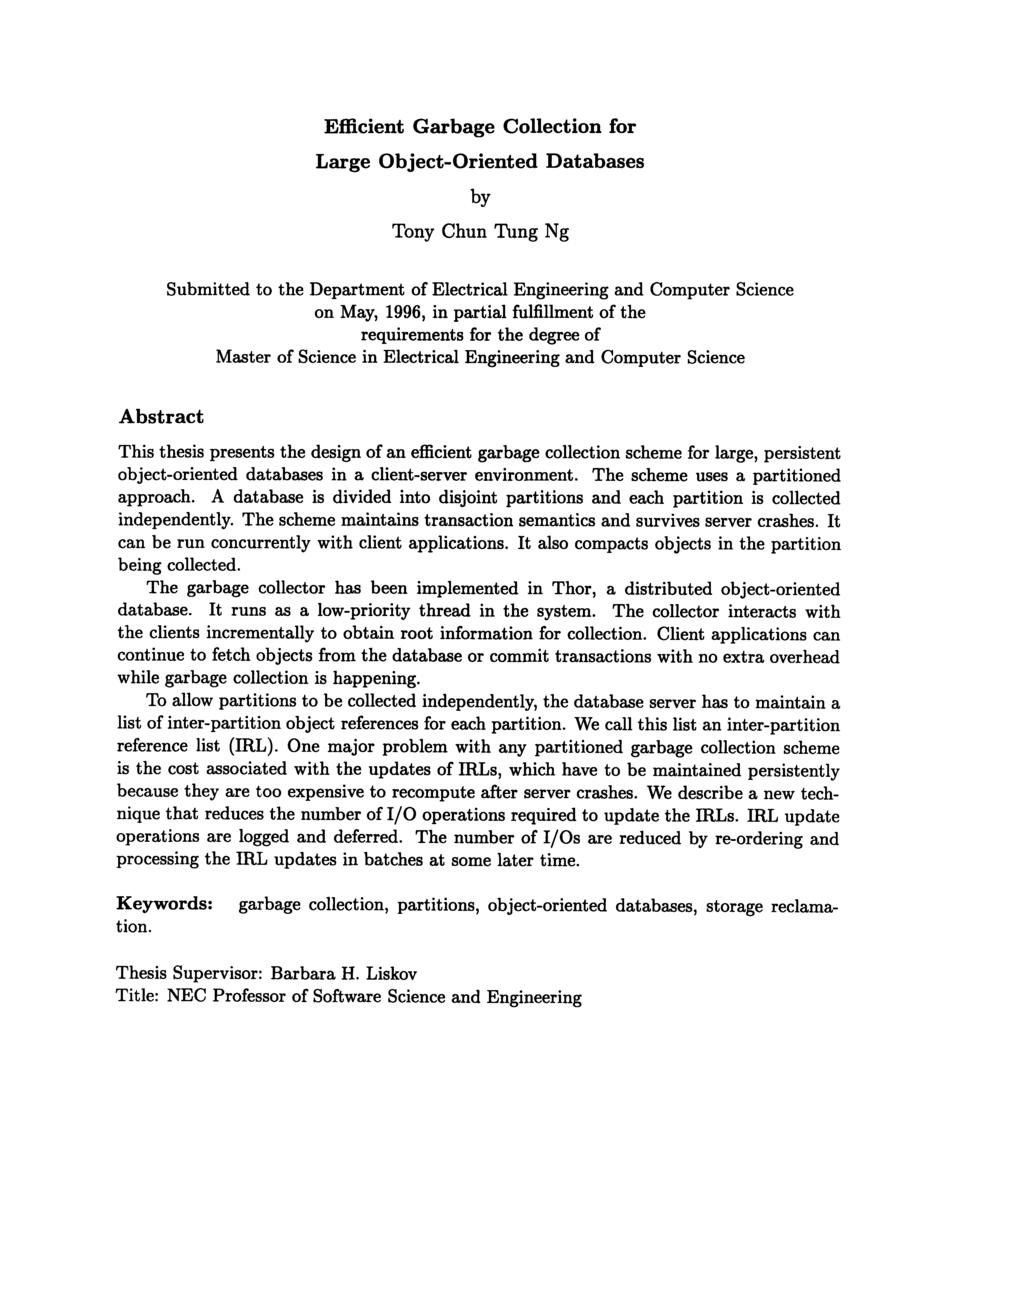 Efficient Garbage Collection for Large Object-Oriented Databases by Tony Chun Tung Ng Submitted to the Department of Electrical Engineering and Computer Science on May, 1996, in partial fulfillment